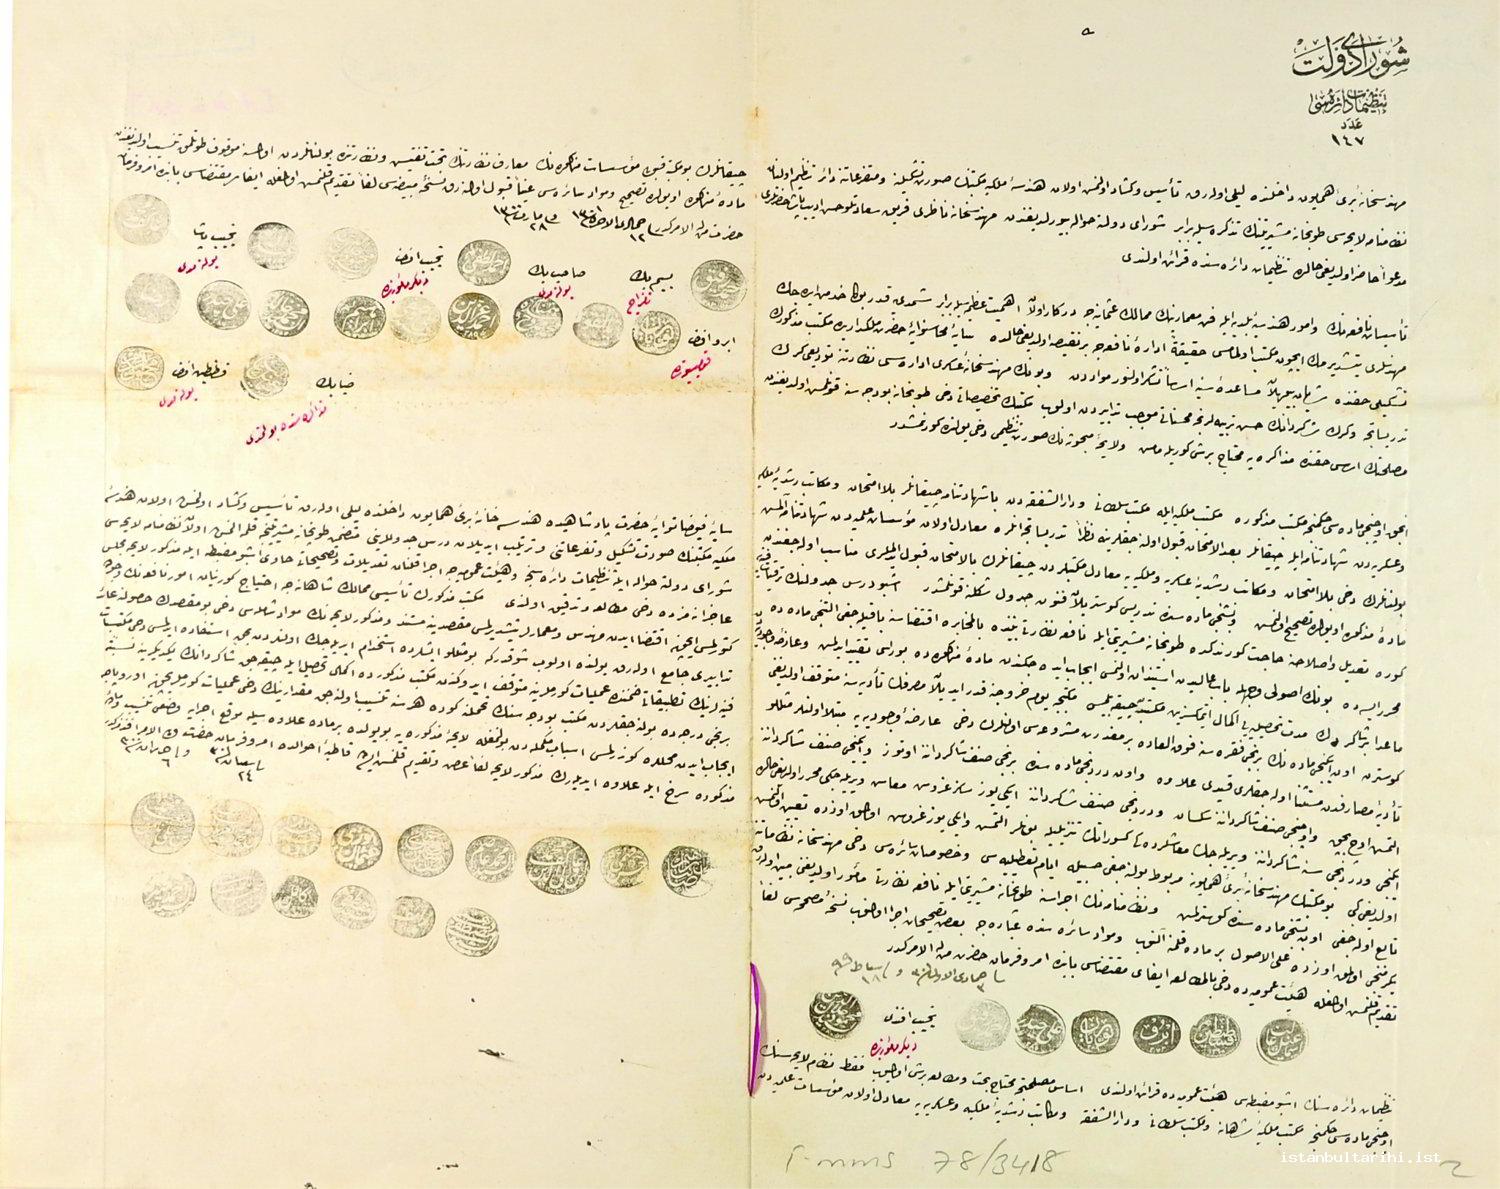 1- The Council of the State’s decision dated 1891 about building the School of Hendese-i Mülkiye, its curricula, and other issues (BOA, İ. MMS, no. 78/3418)